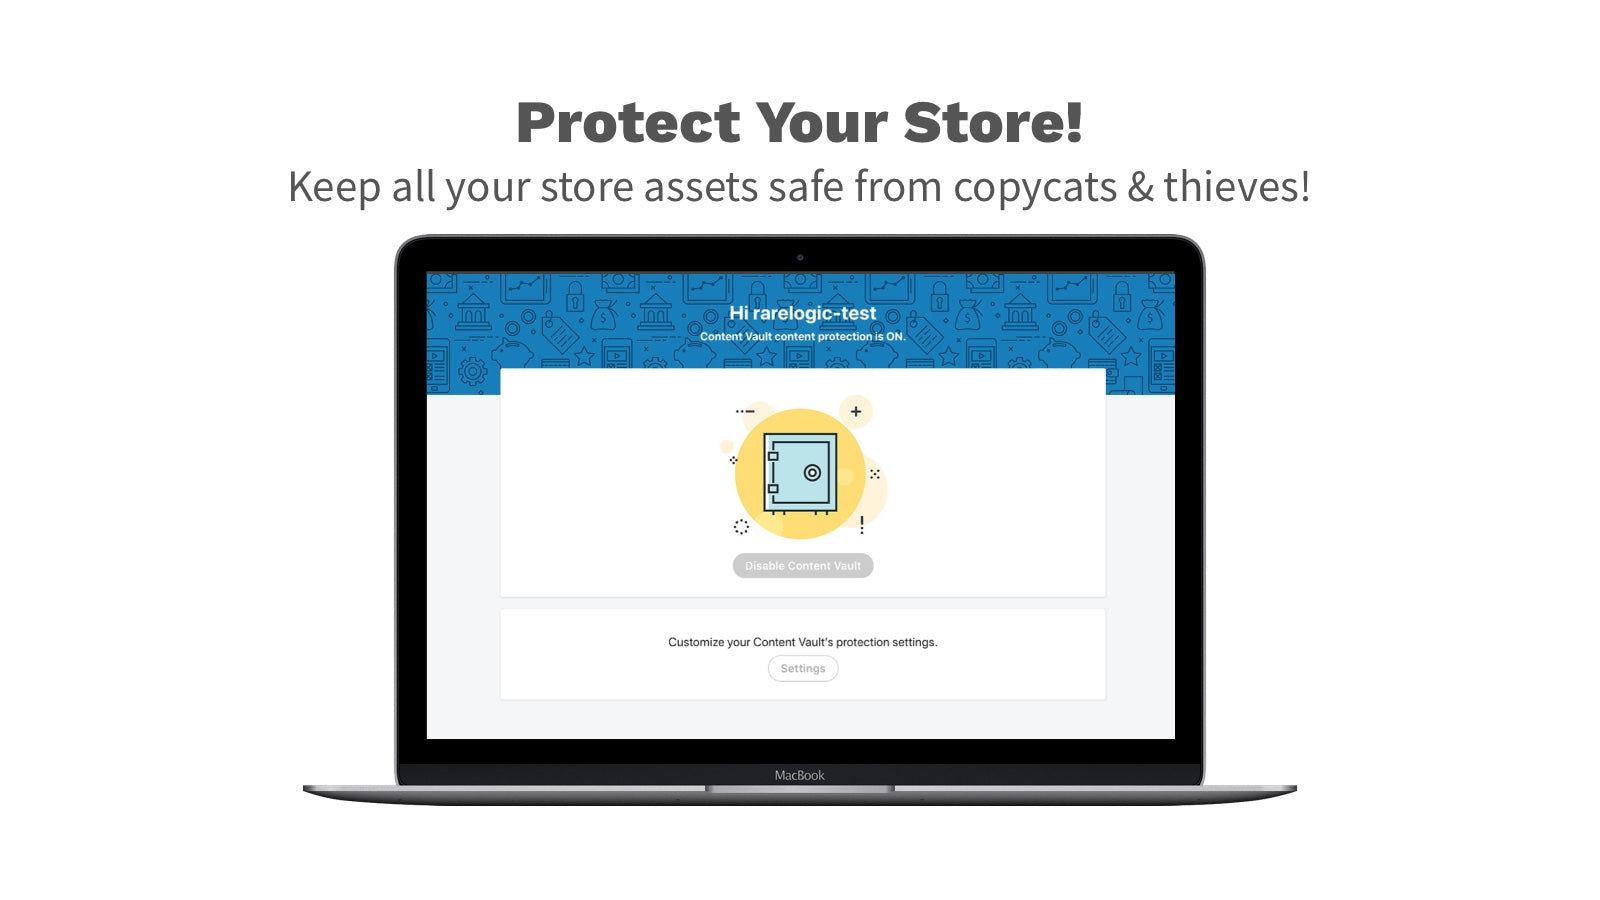 Protect Your Store - keep images safe from content theives